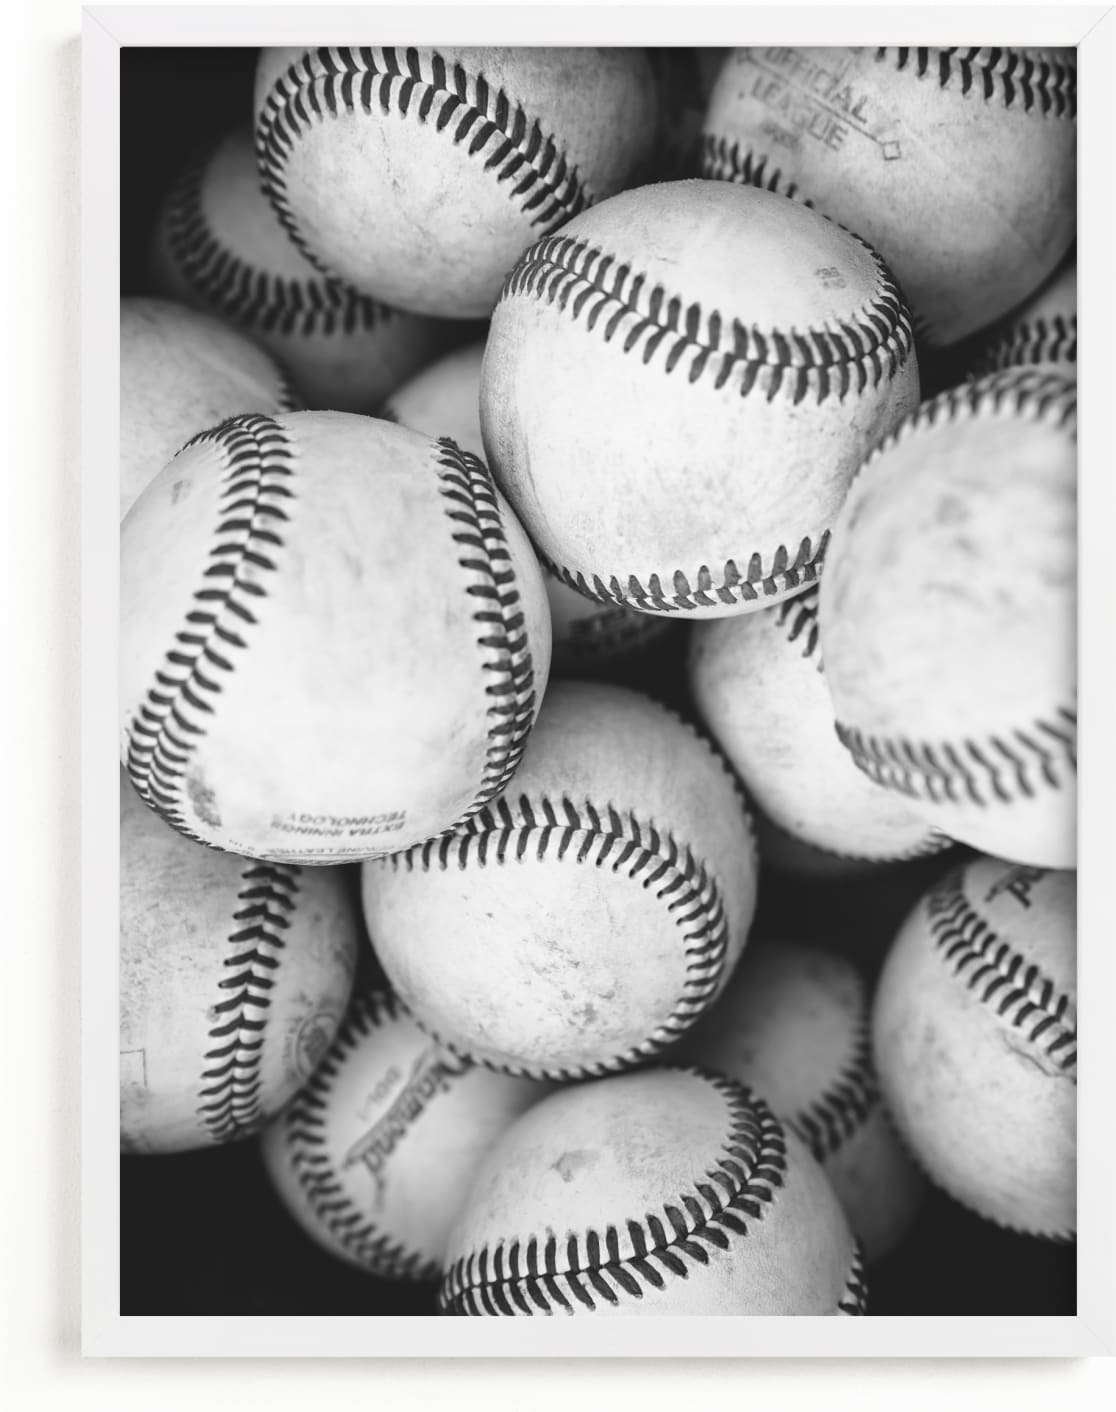 This is a black and white art by Kamala Nahas called Play Ball.